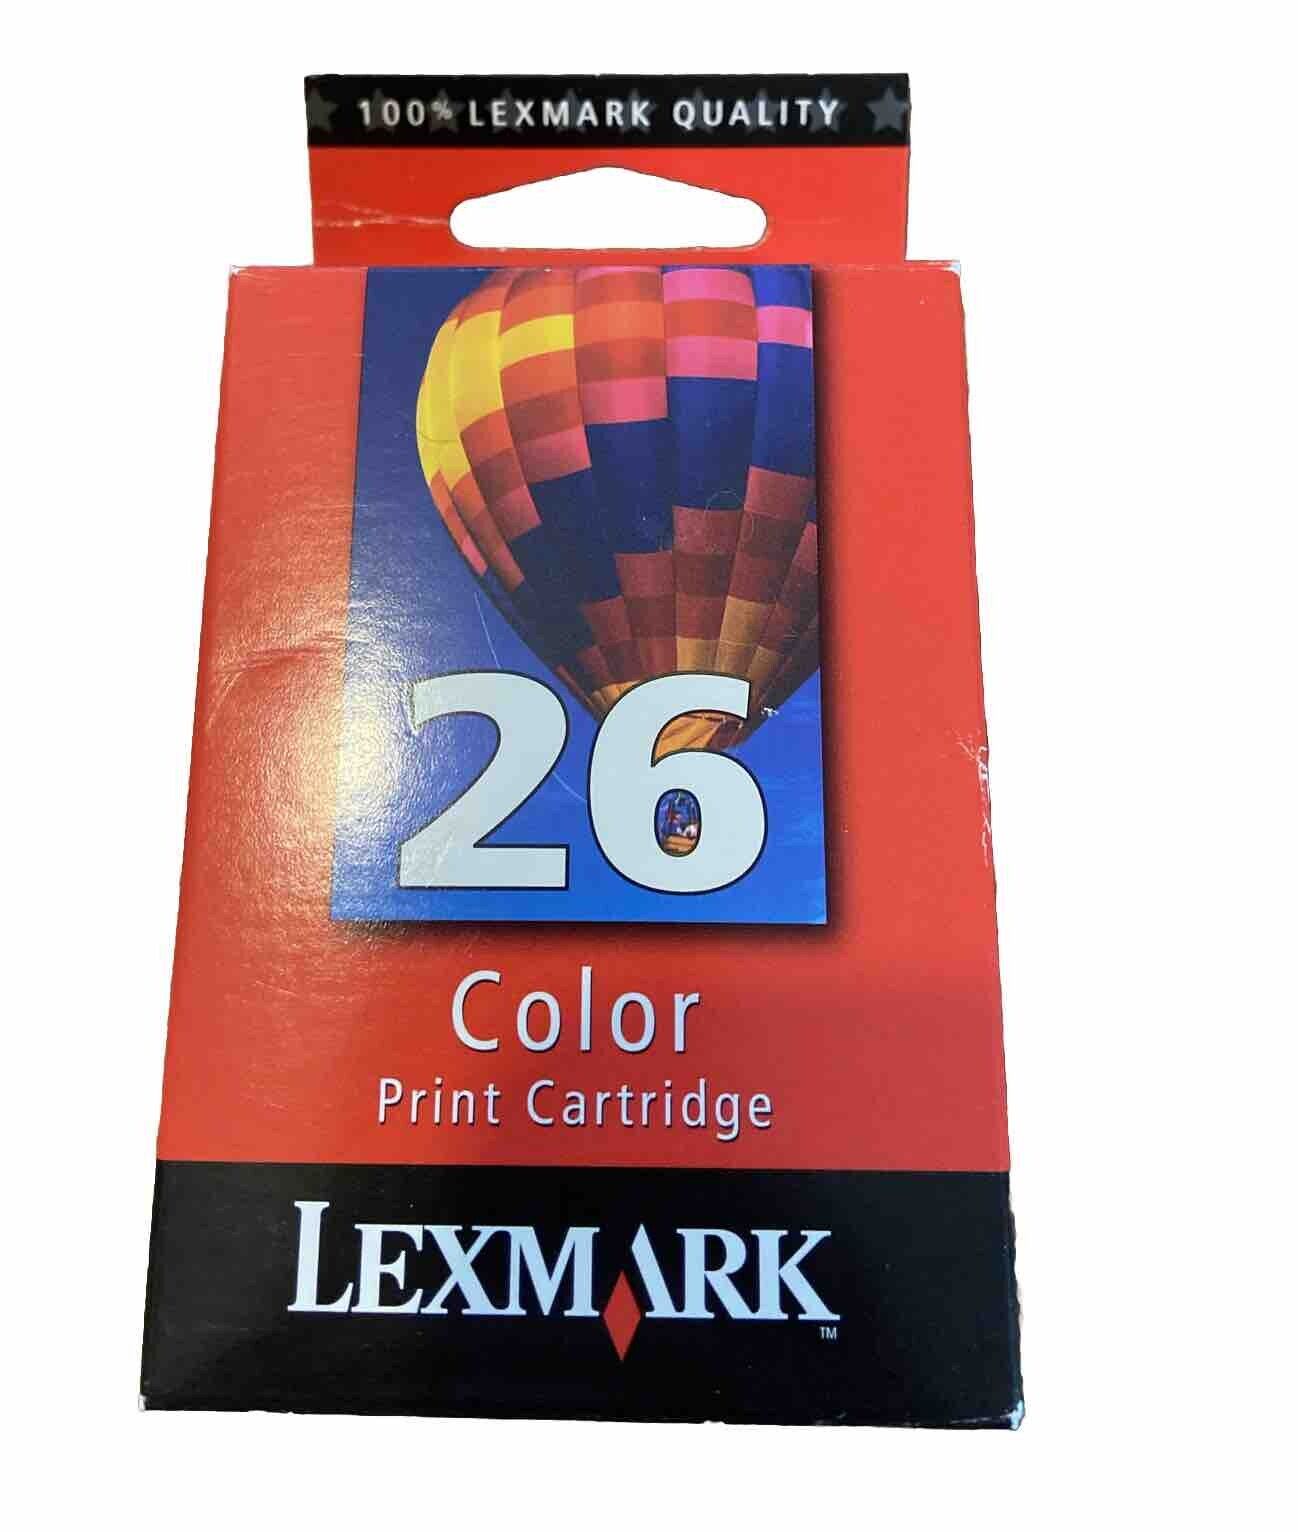 Lexmark 26 Color Print Cartridge  NEW Factory Sealed